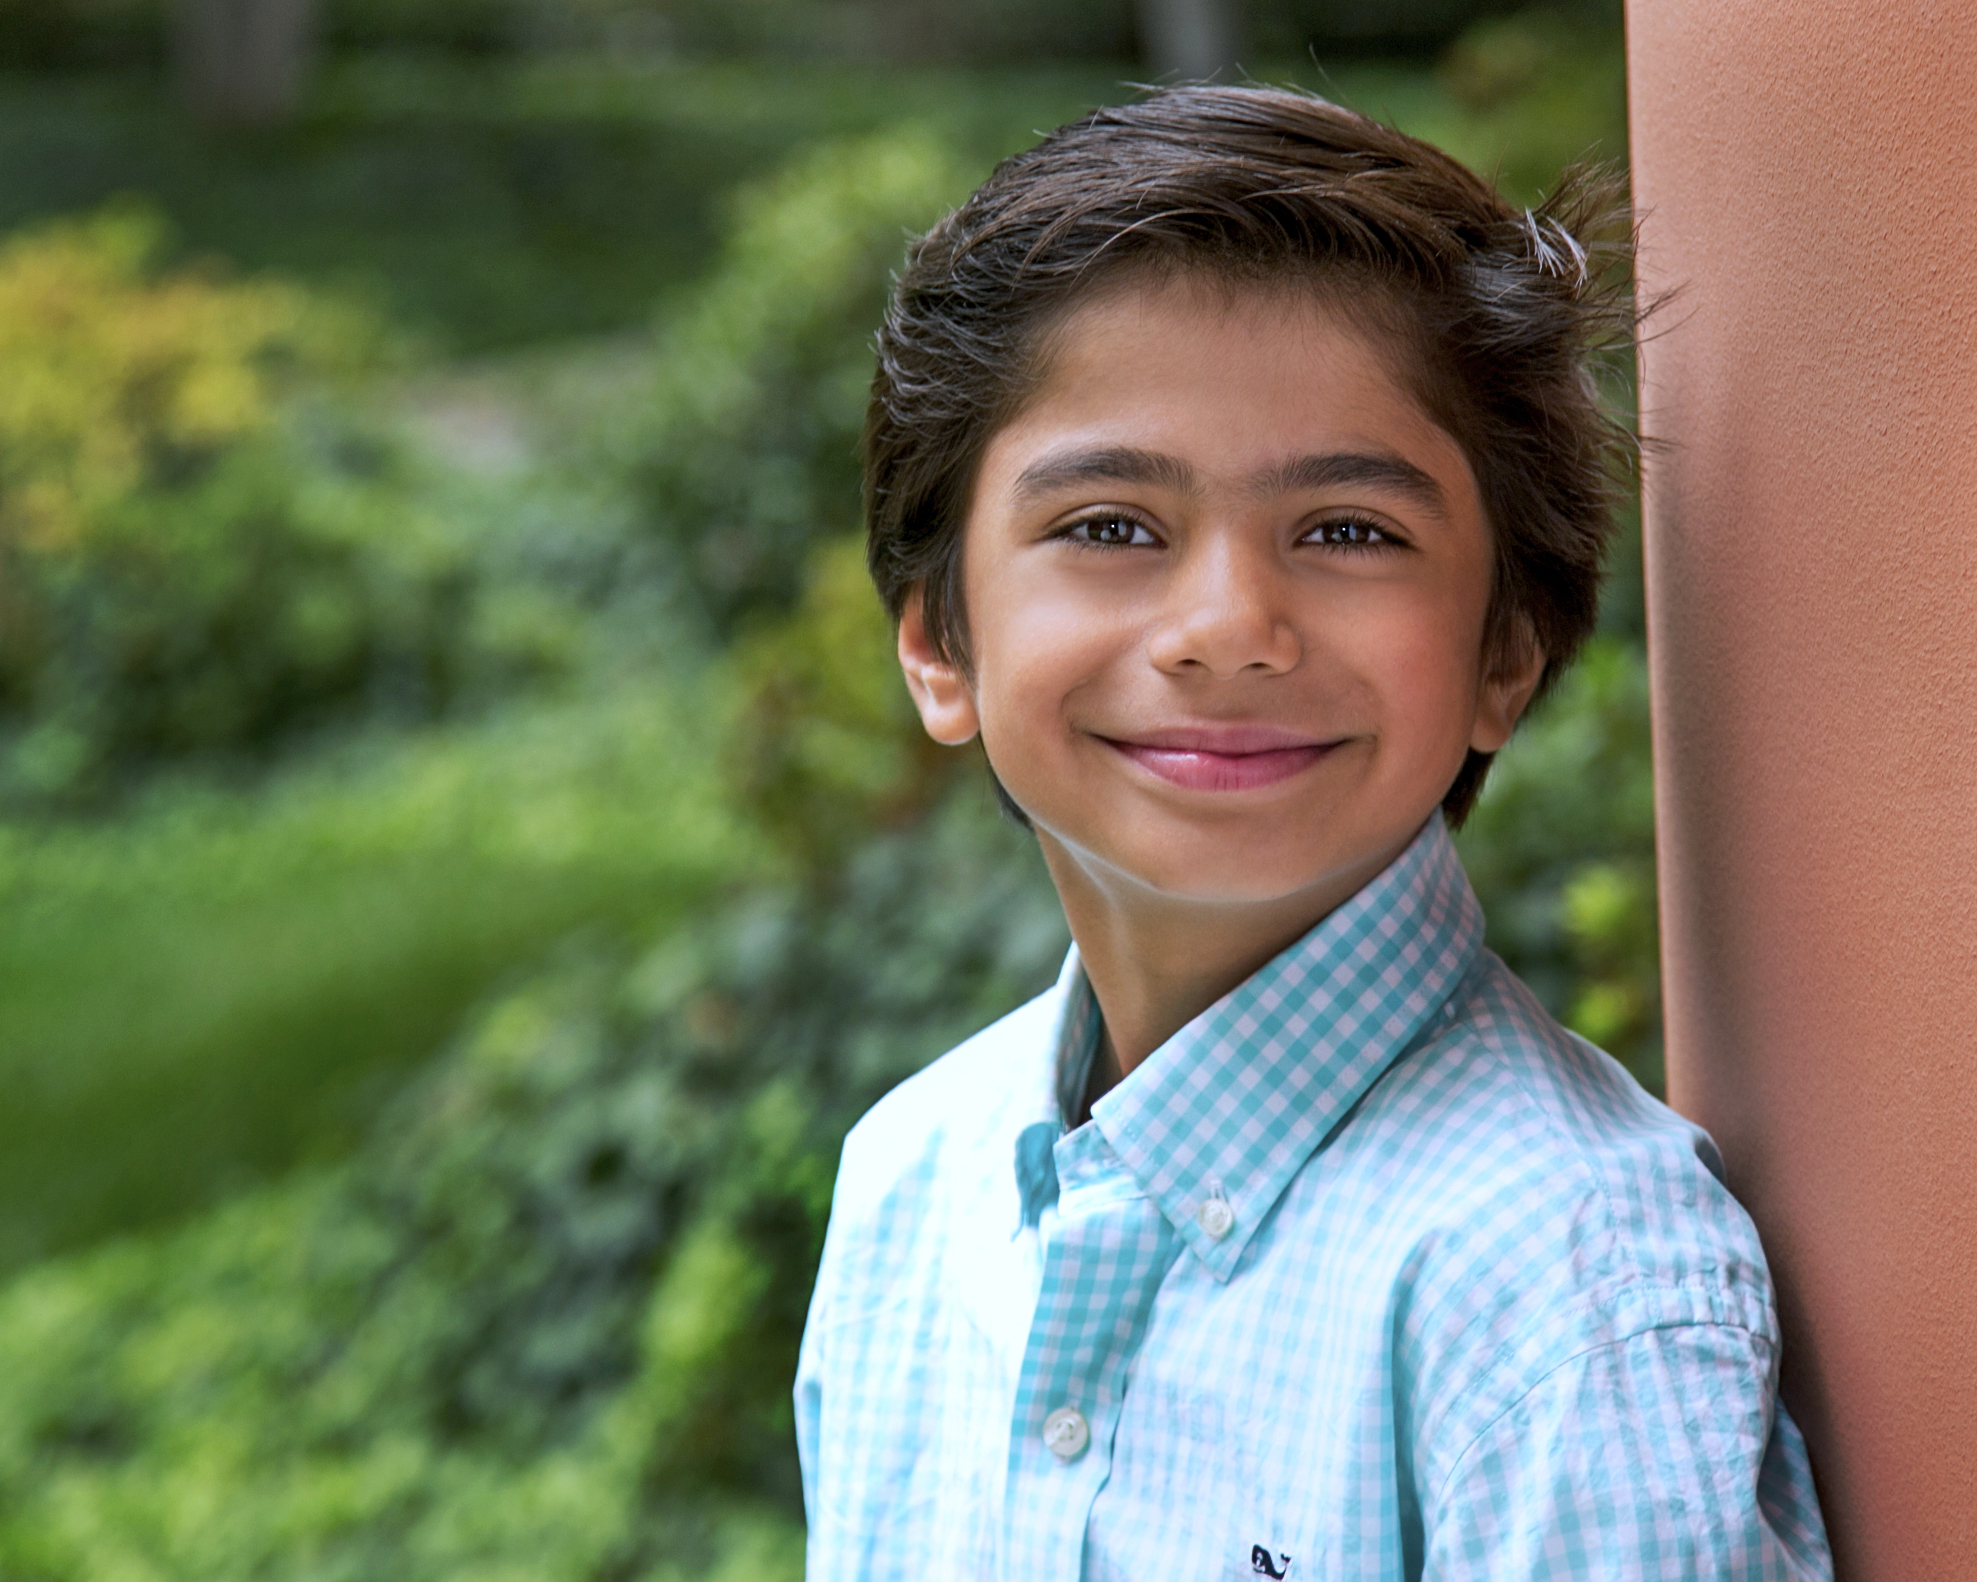 “The Jungle Book” Casts a New Actor for the Character of “Mowgli”